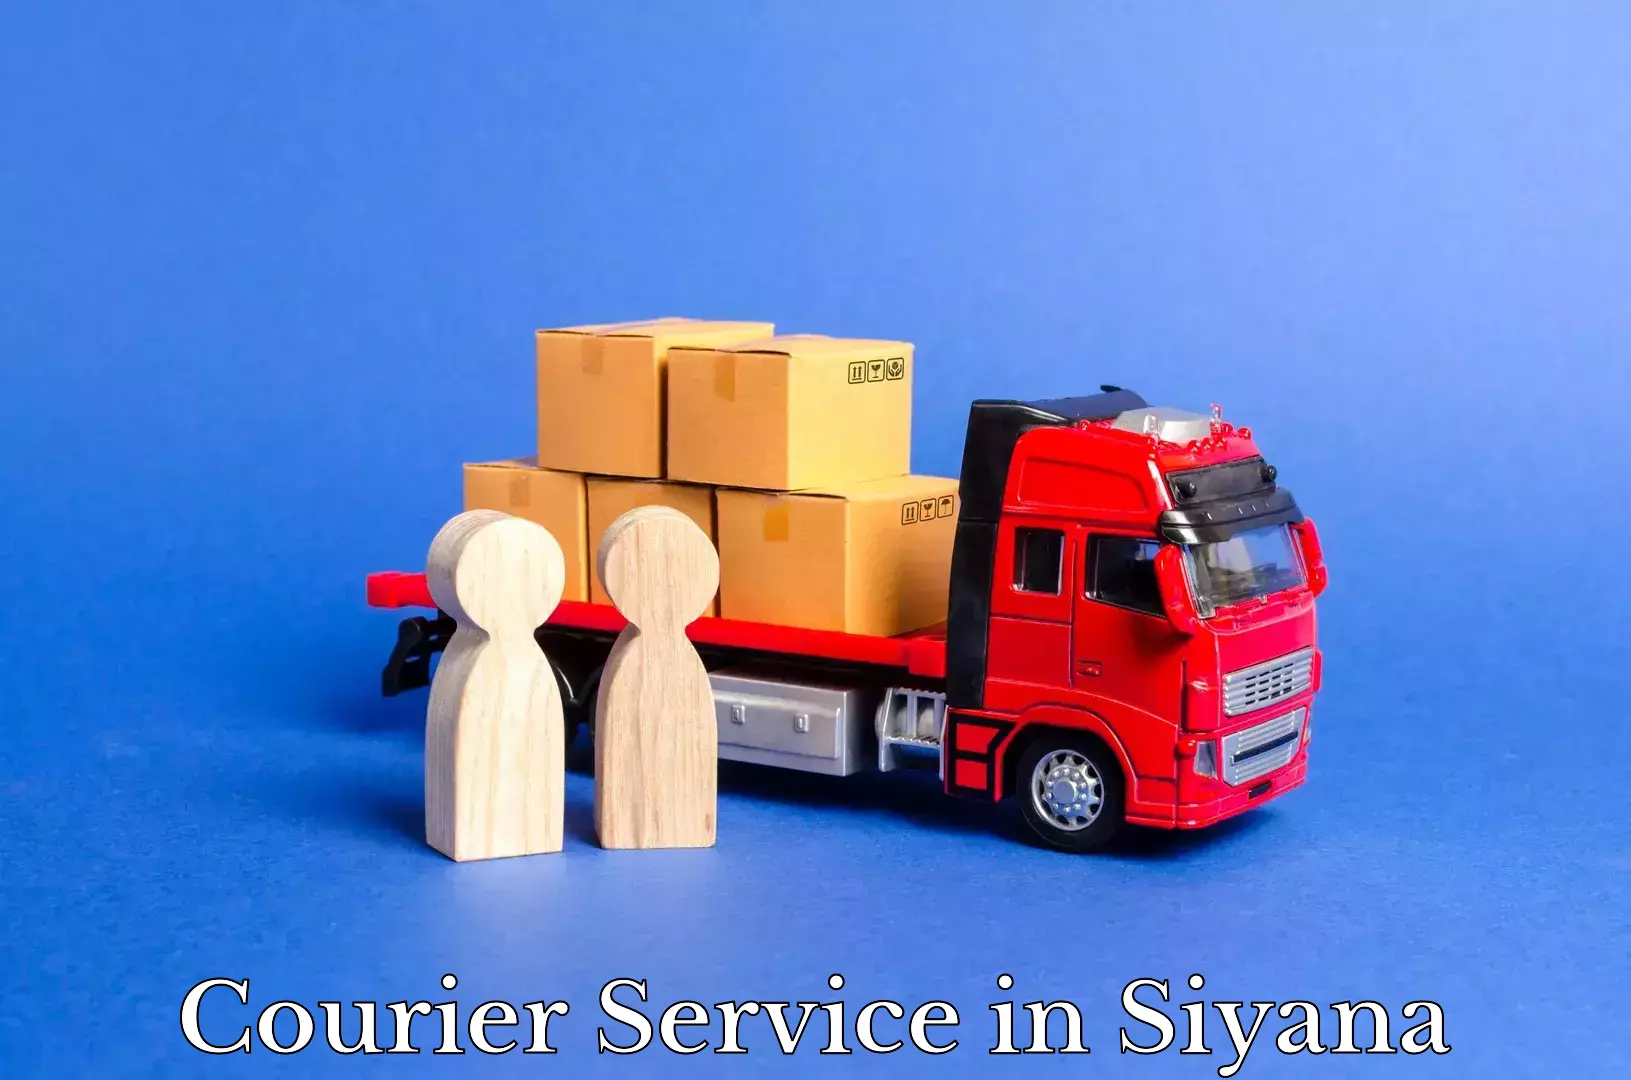 Reliable logistics providers in Siyana